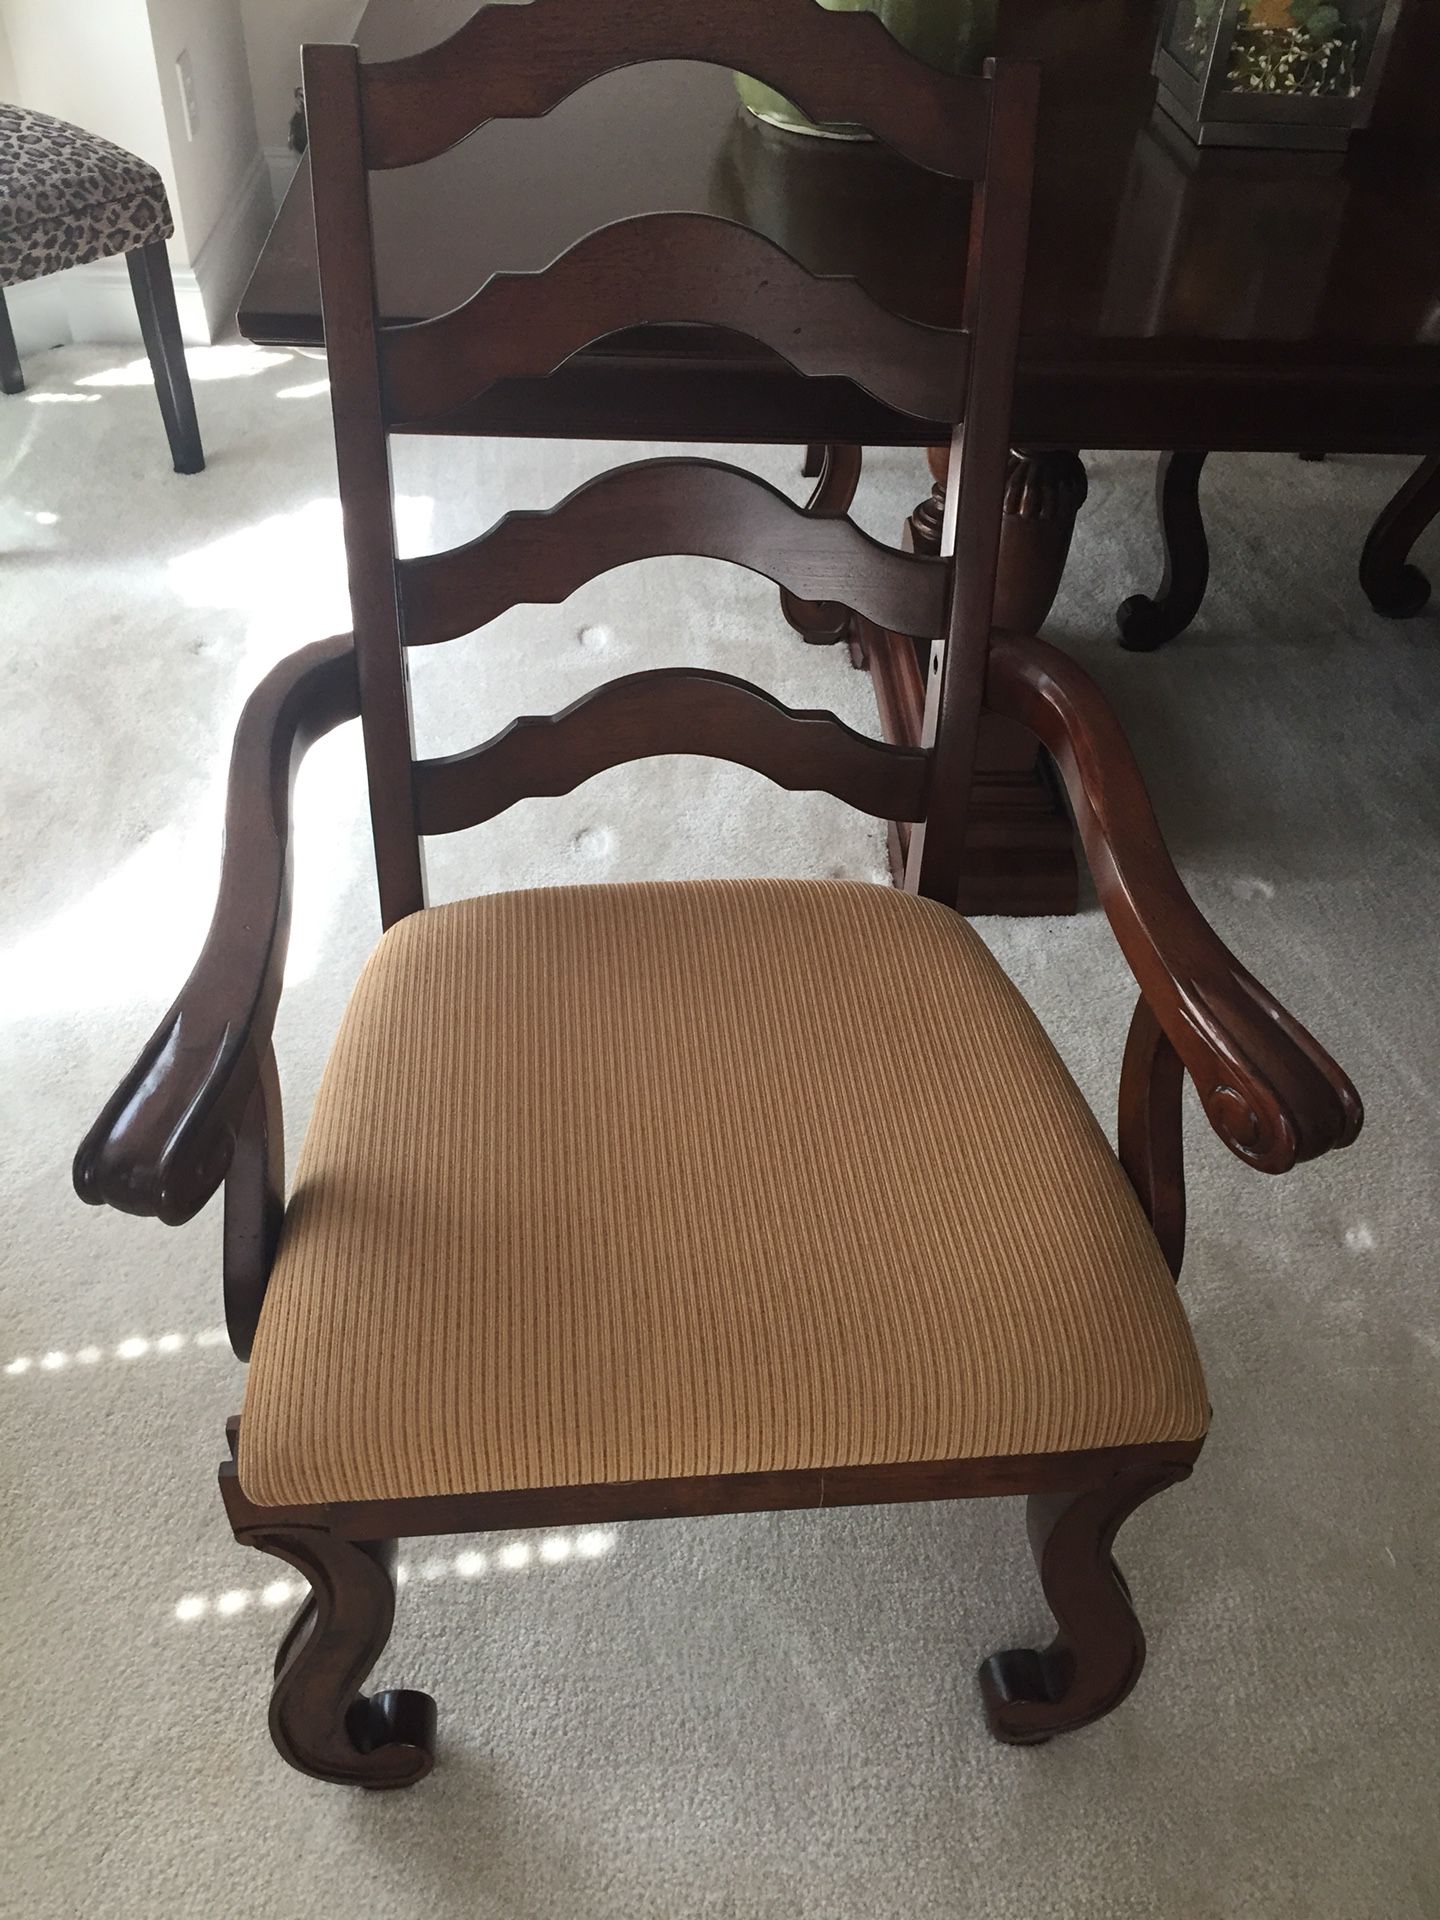 6 Chairs for Sale